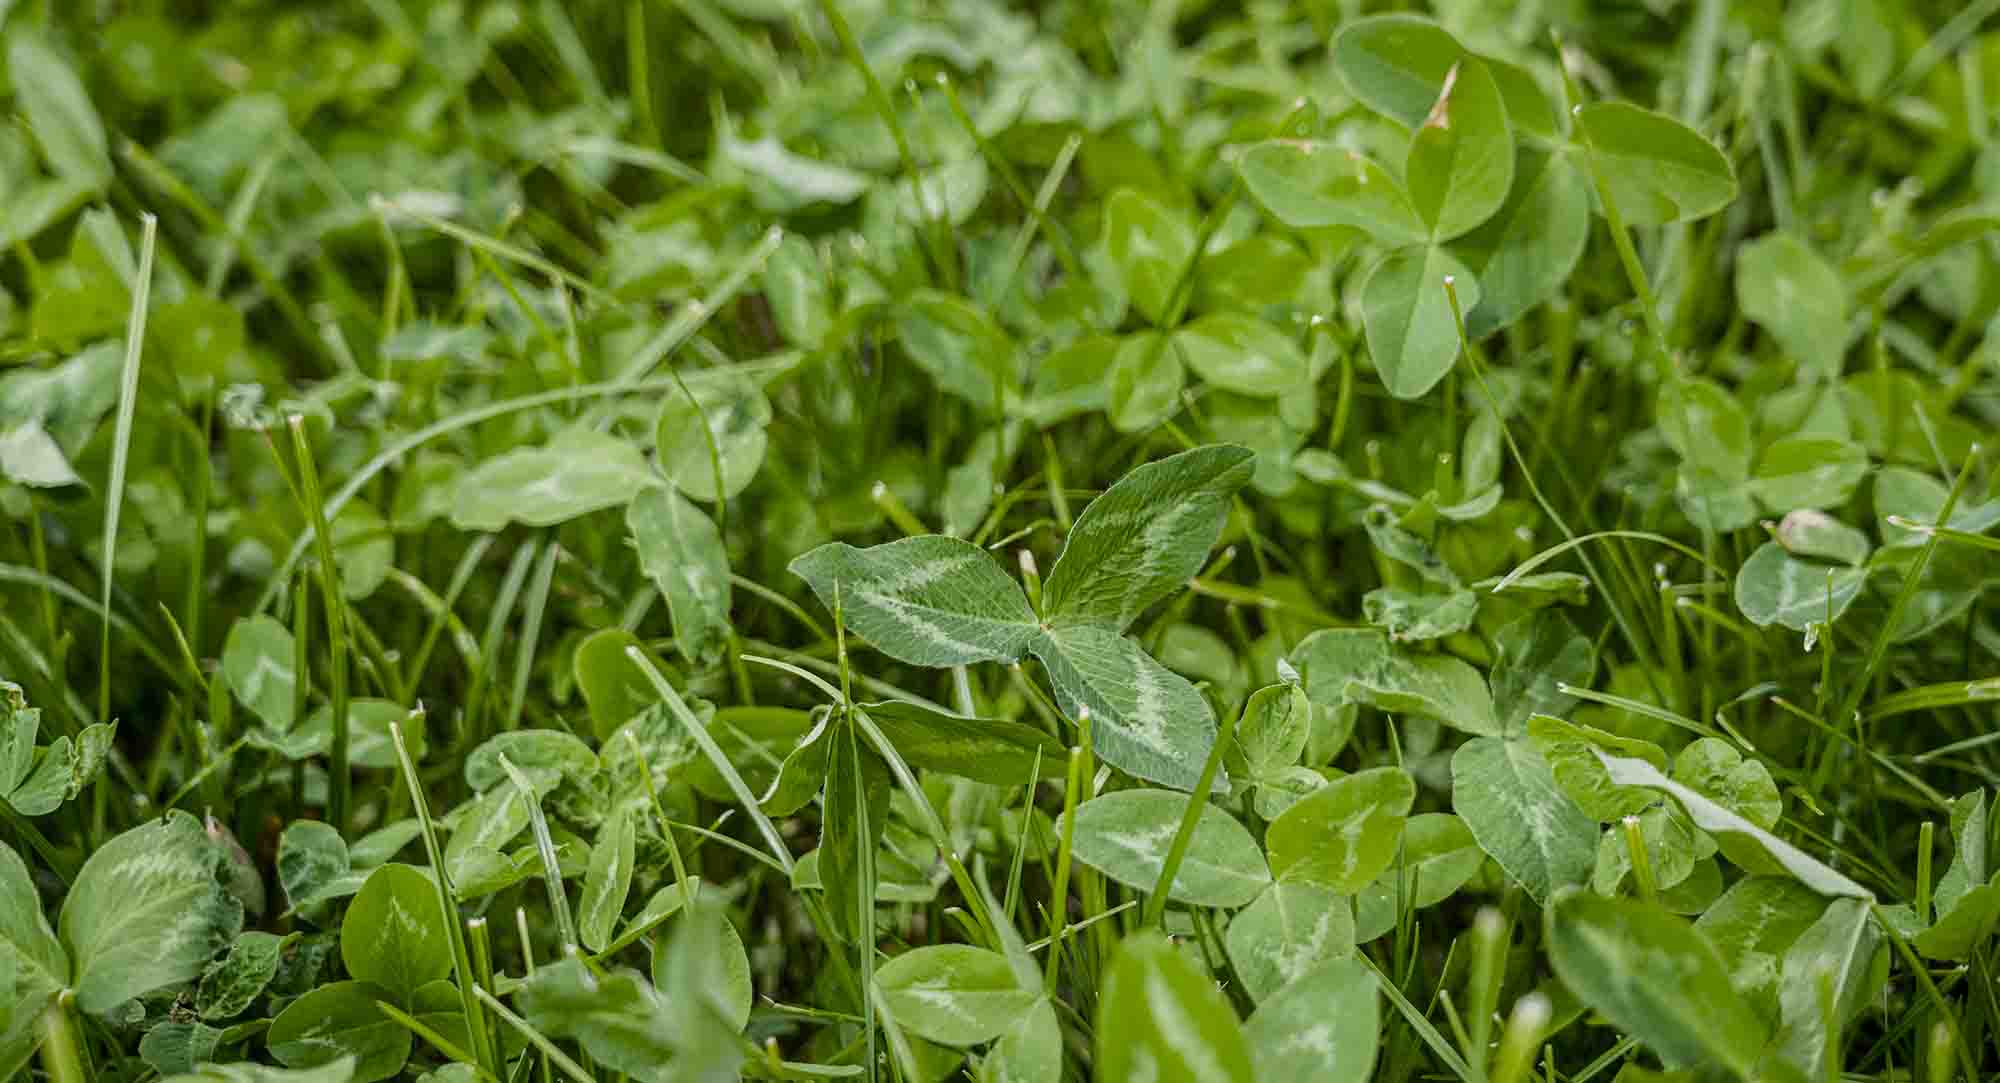 ECO Clover Lawn Seed Growing on Garden Lawn